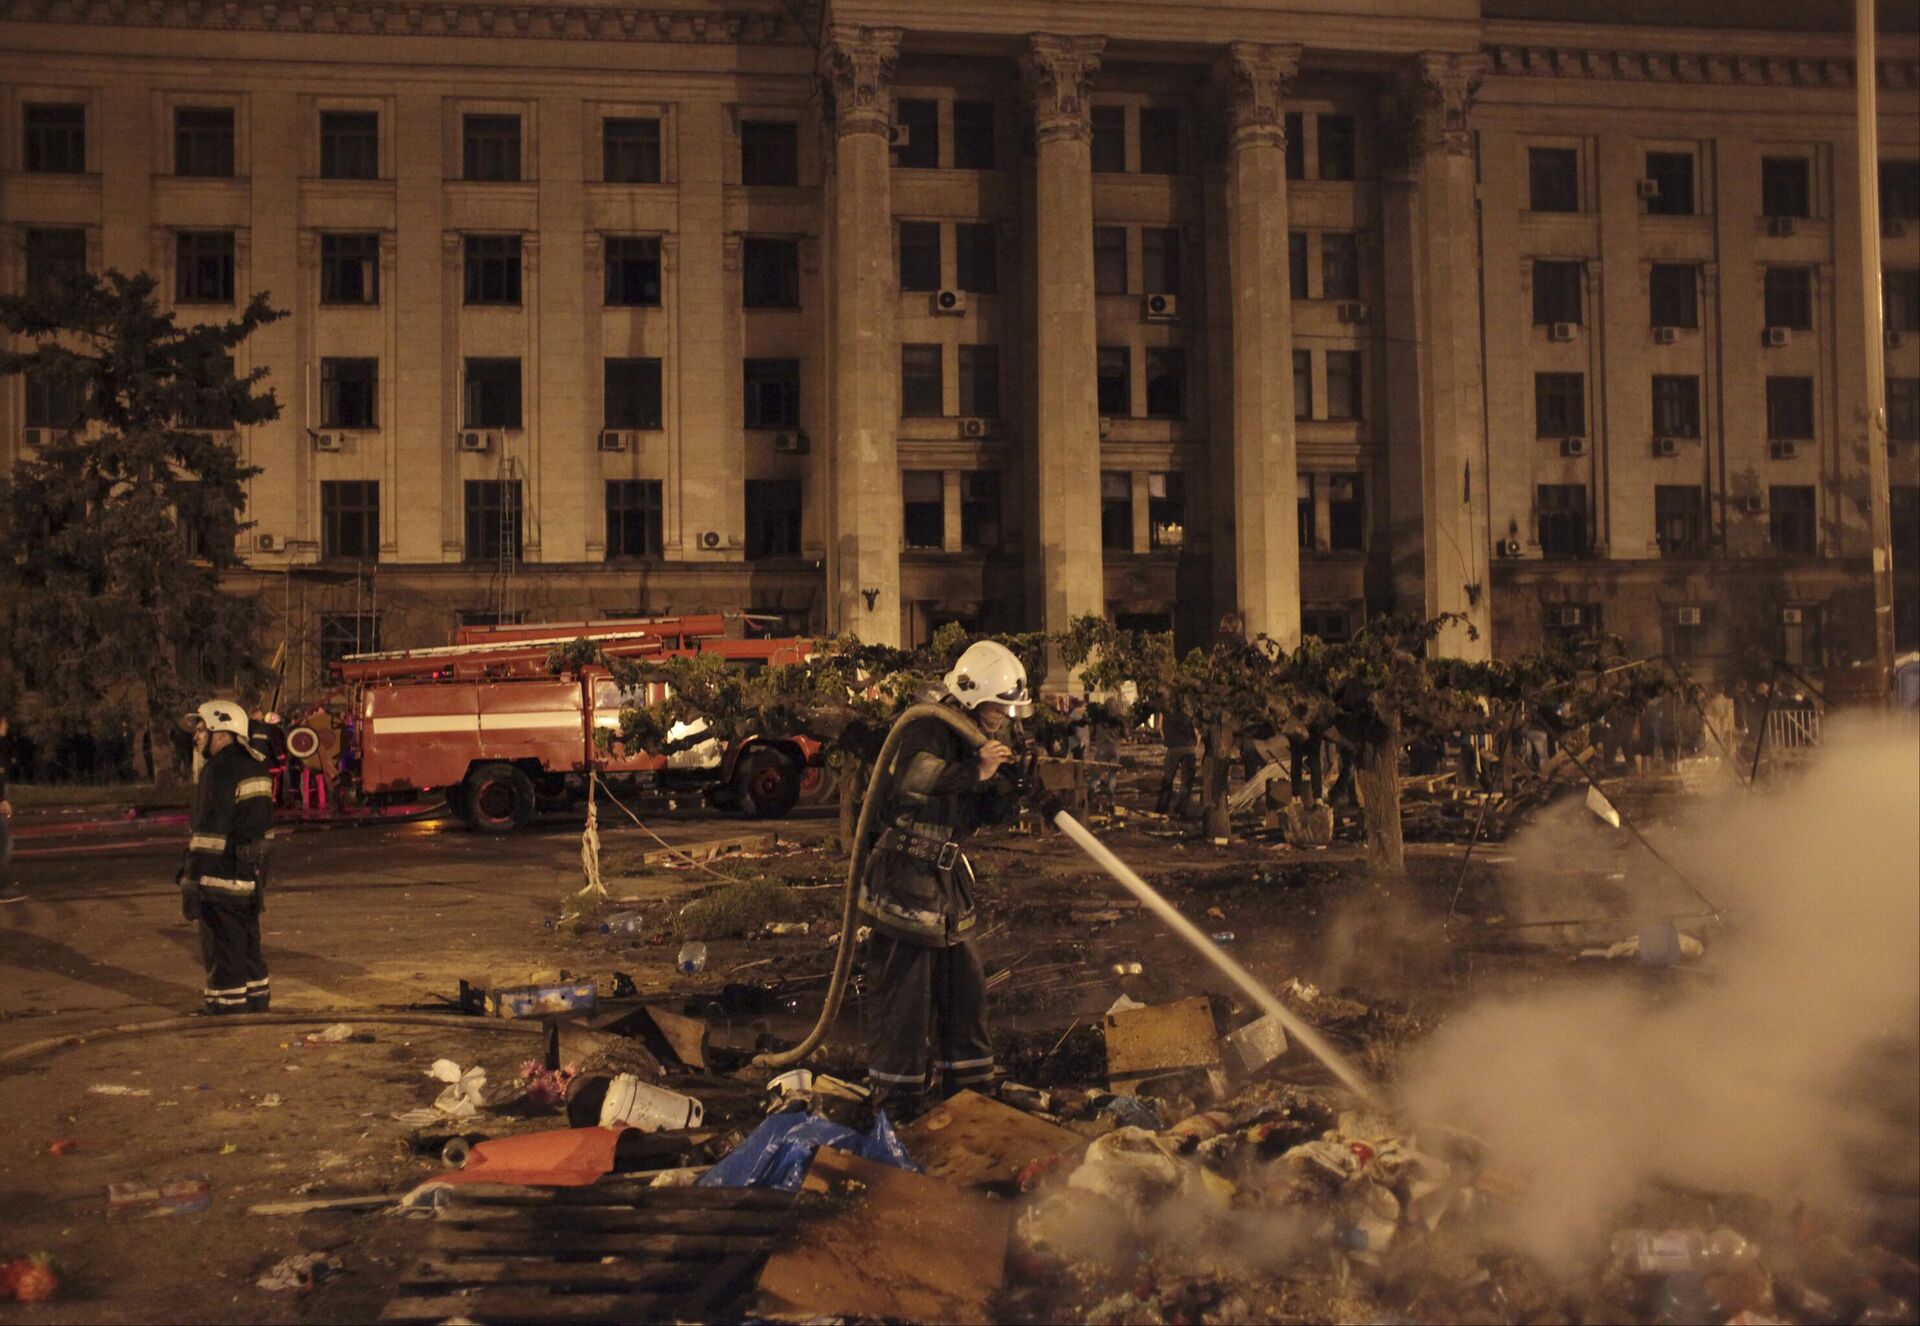 2014 Odessa Massacre: How Radicals Drowned City in Blood to Subdue Ukraine